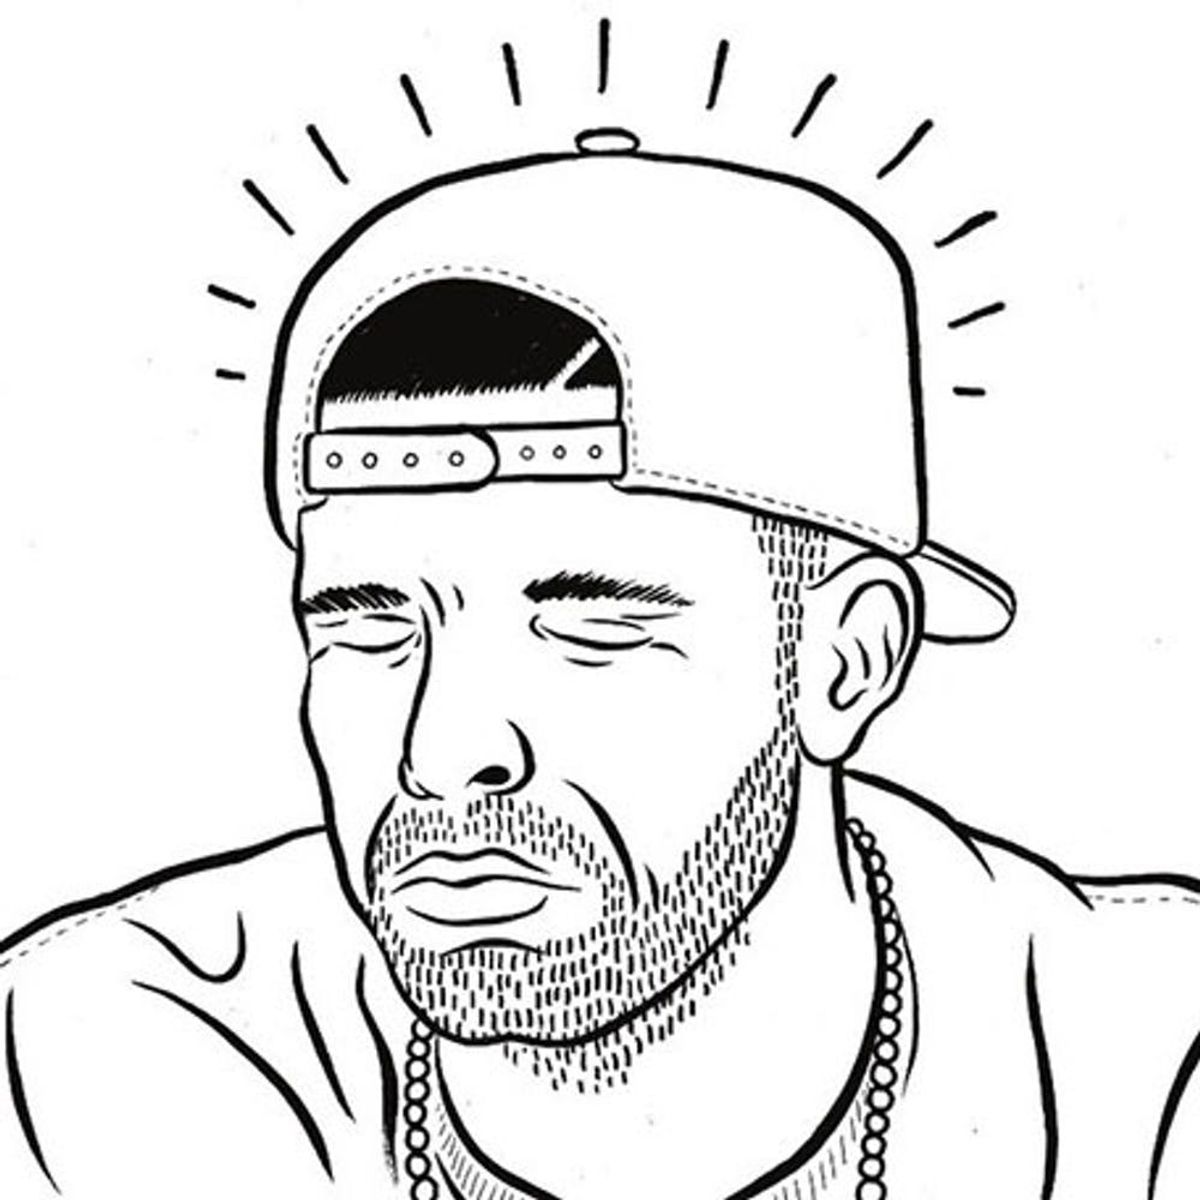 Forget Drake Cakes, There Is Now a Drake Coloring Book